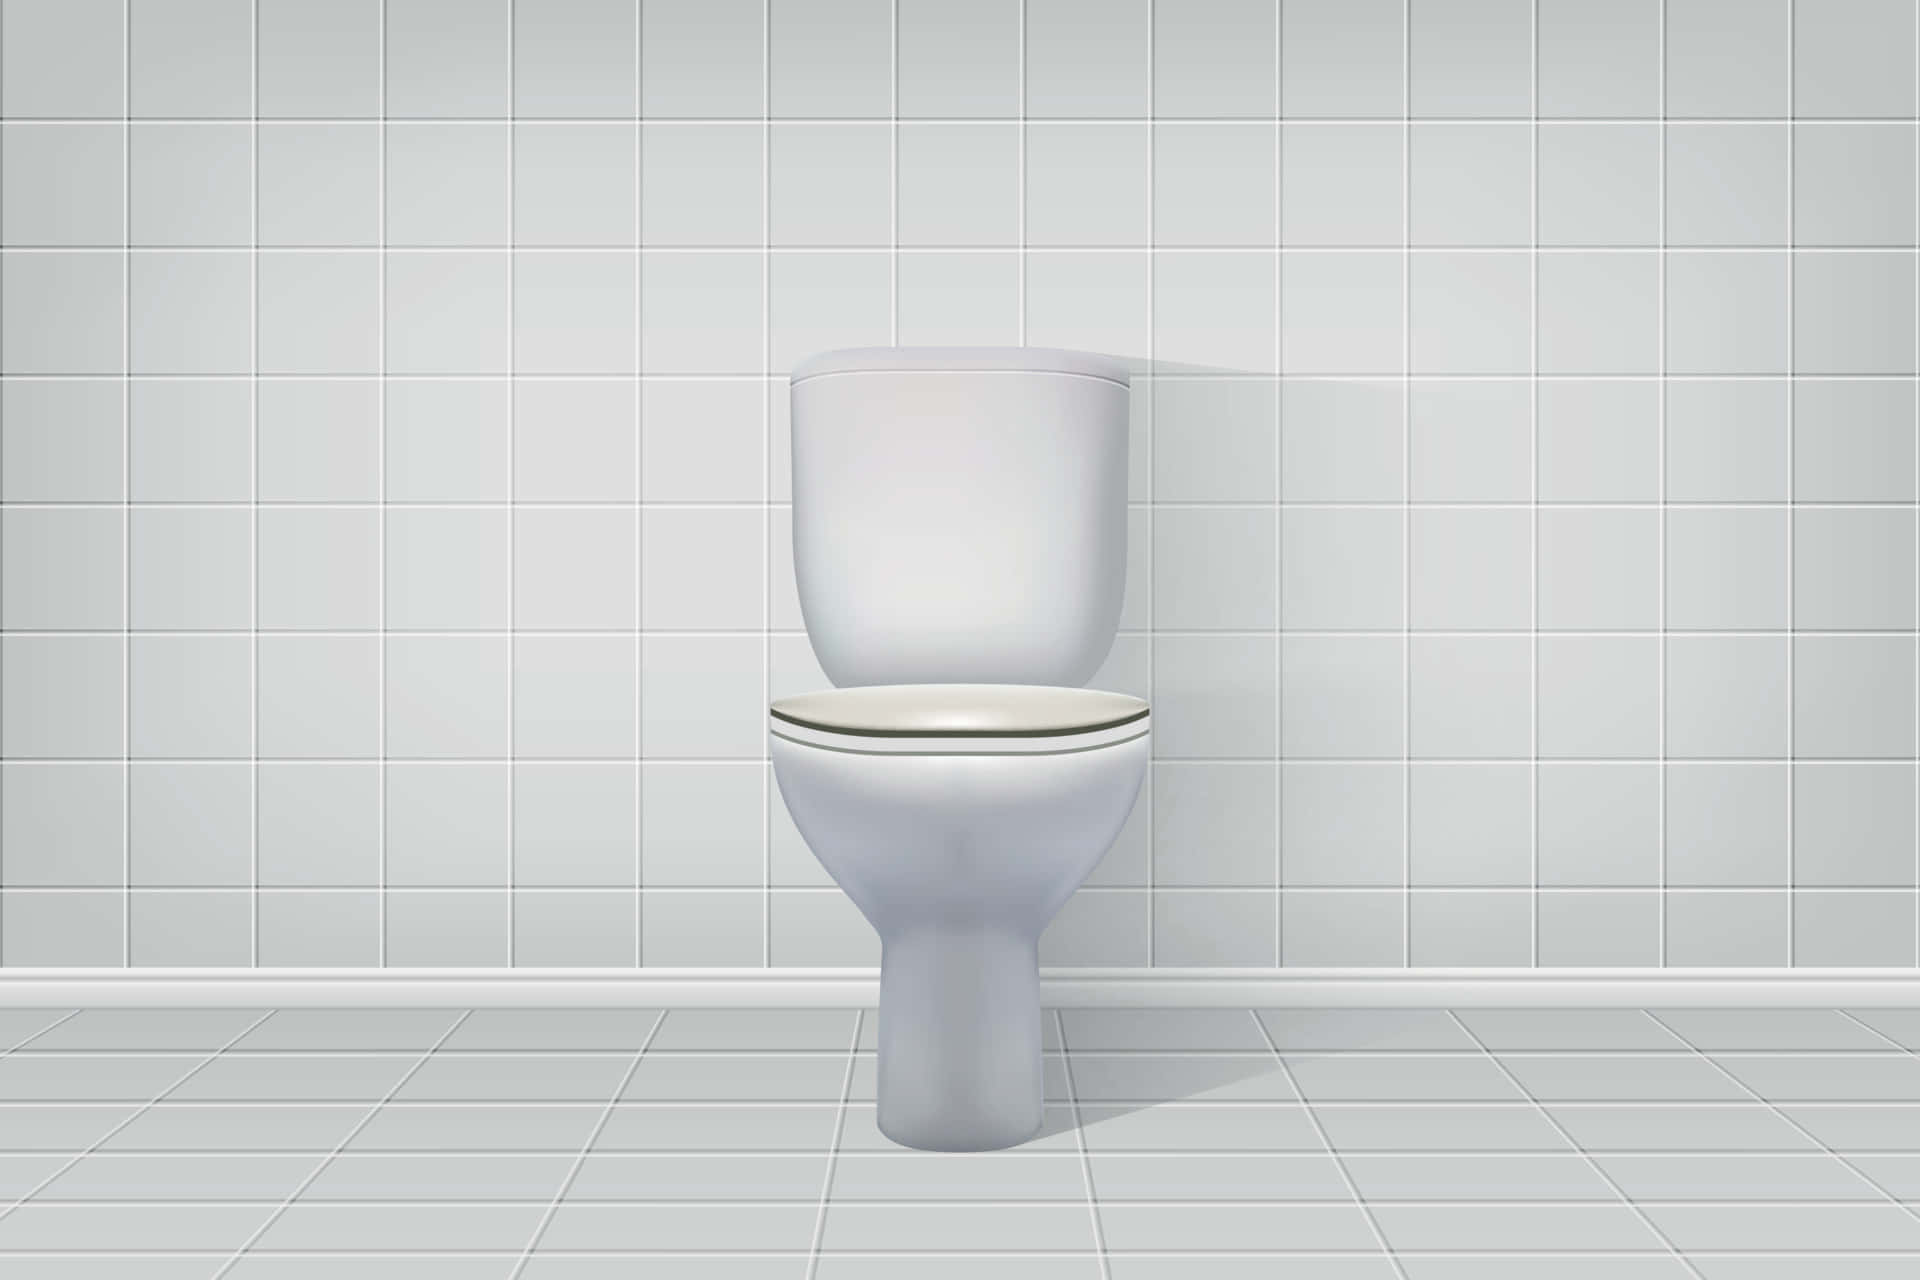 Sometimes Simple Is Best: The Everyday Toilet